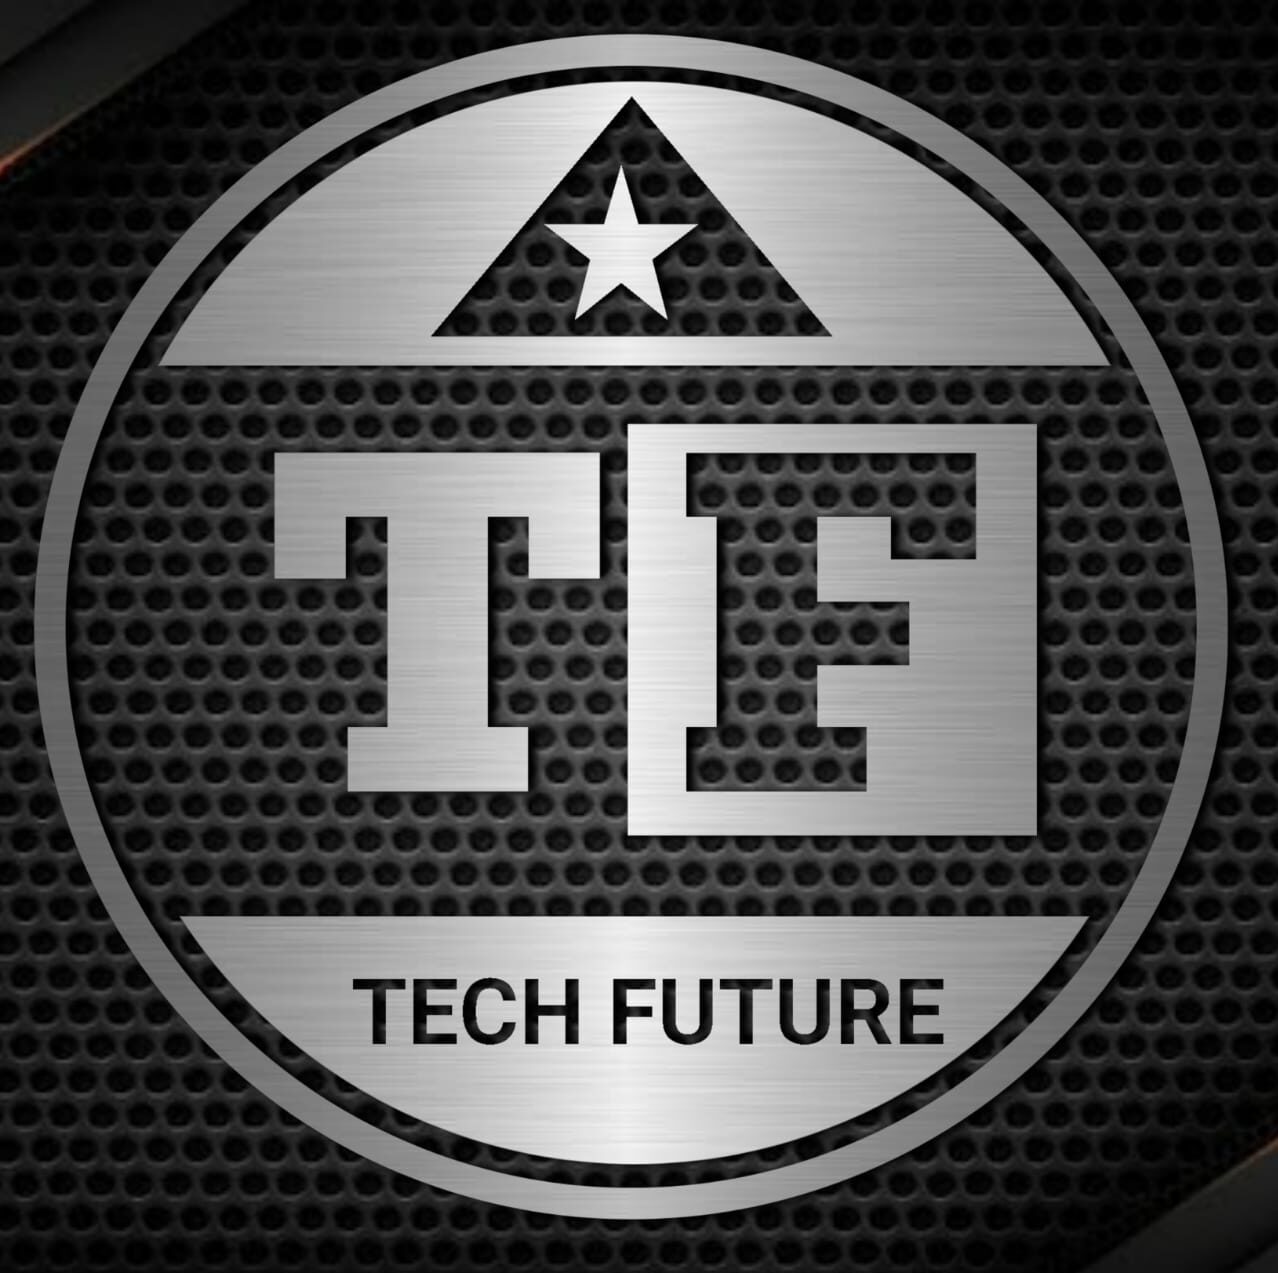 Tech future world logo for clearly showing tech and inventions